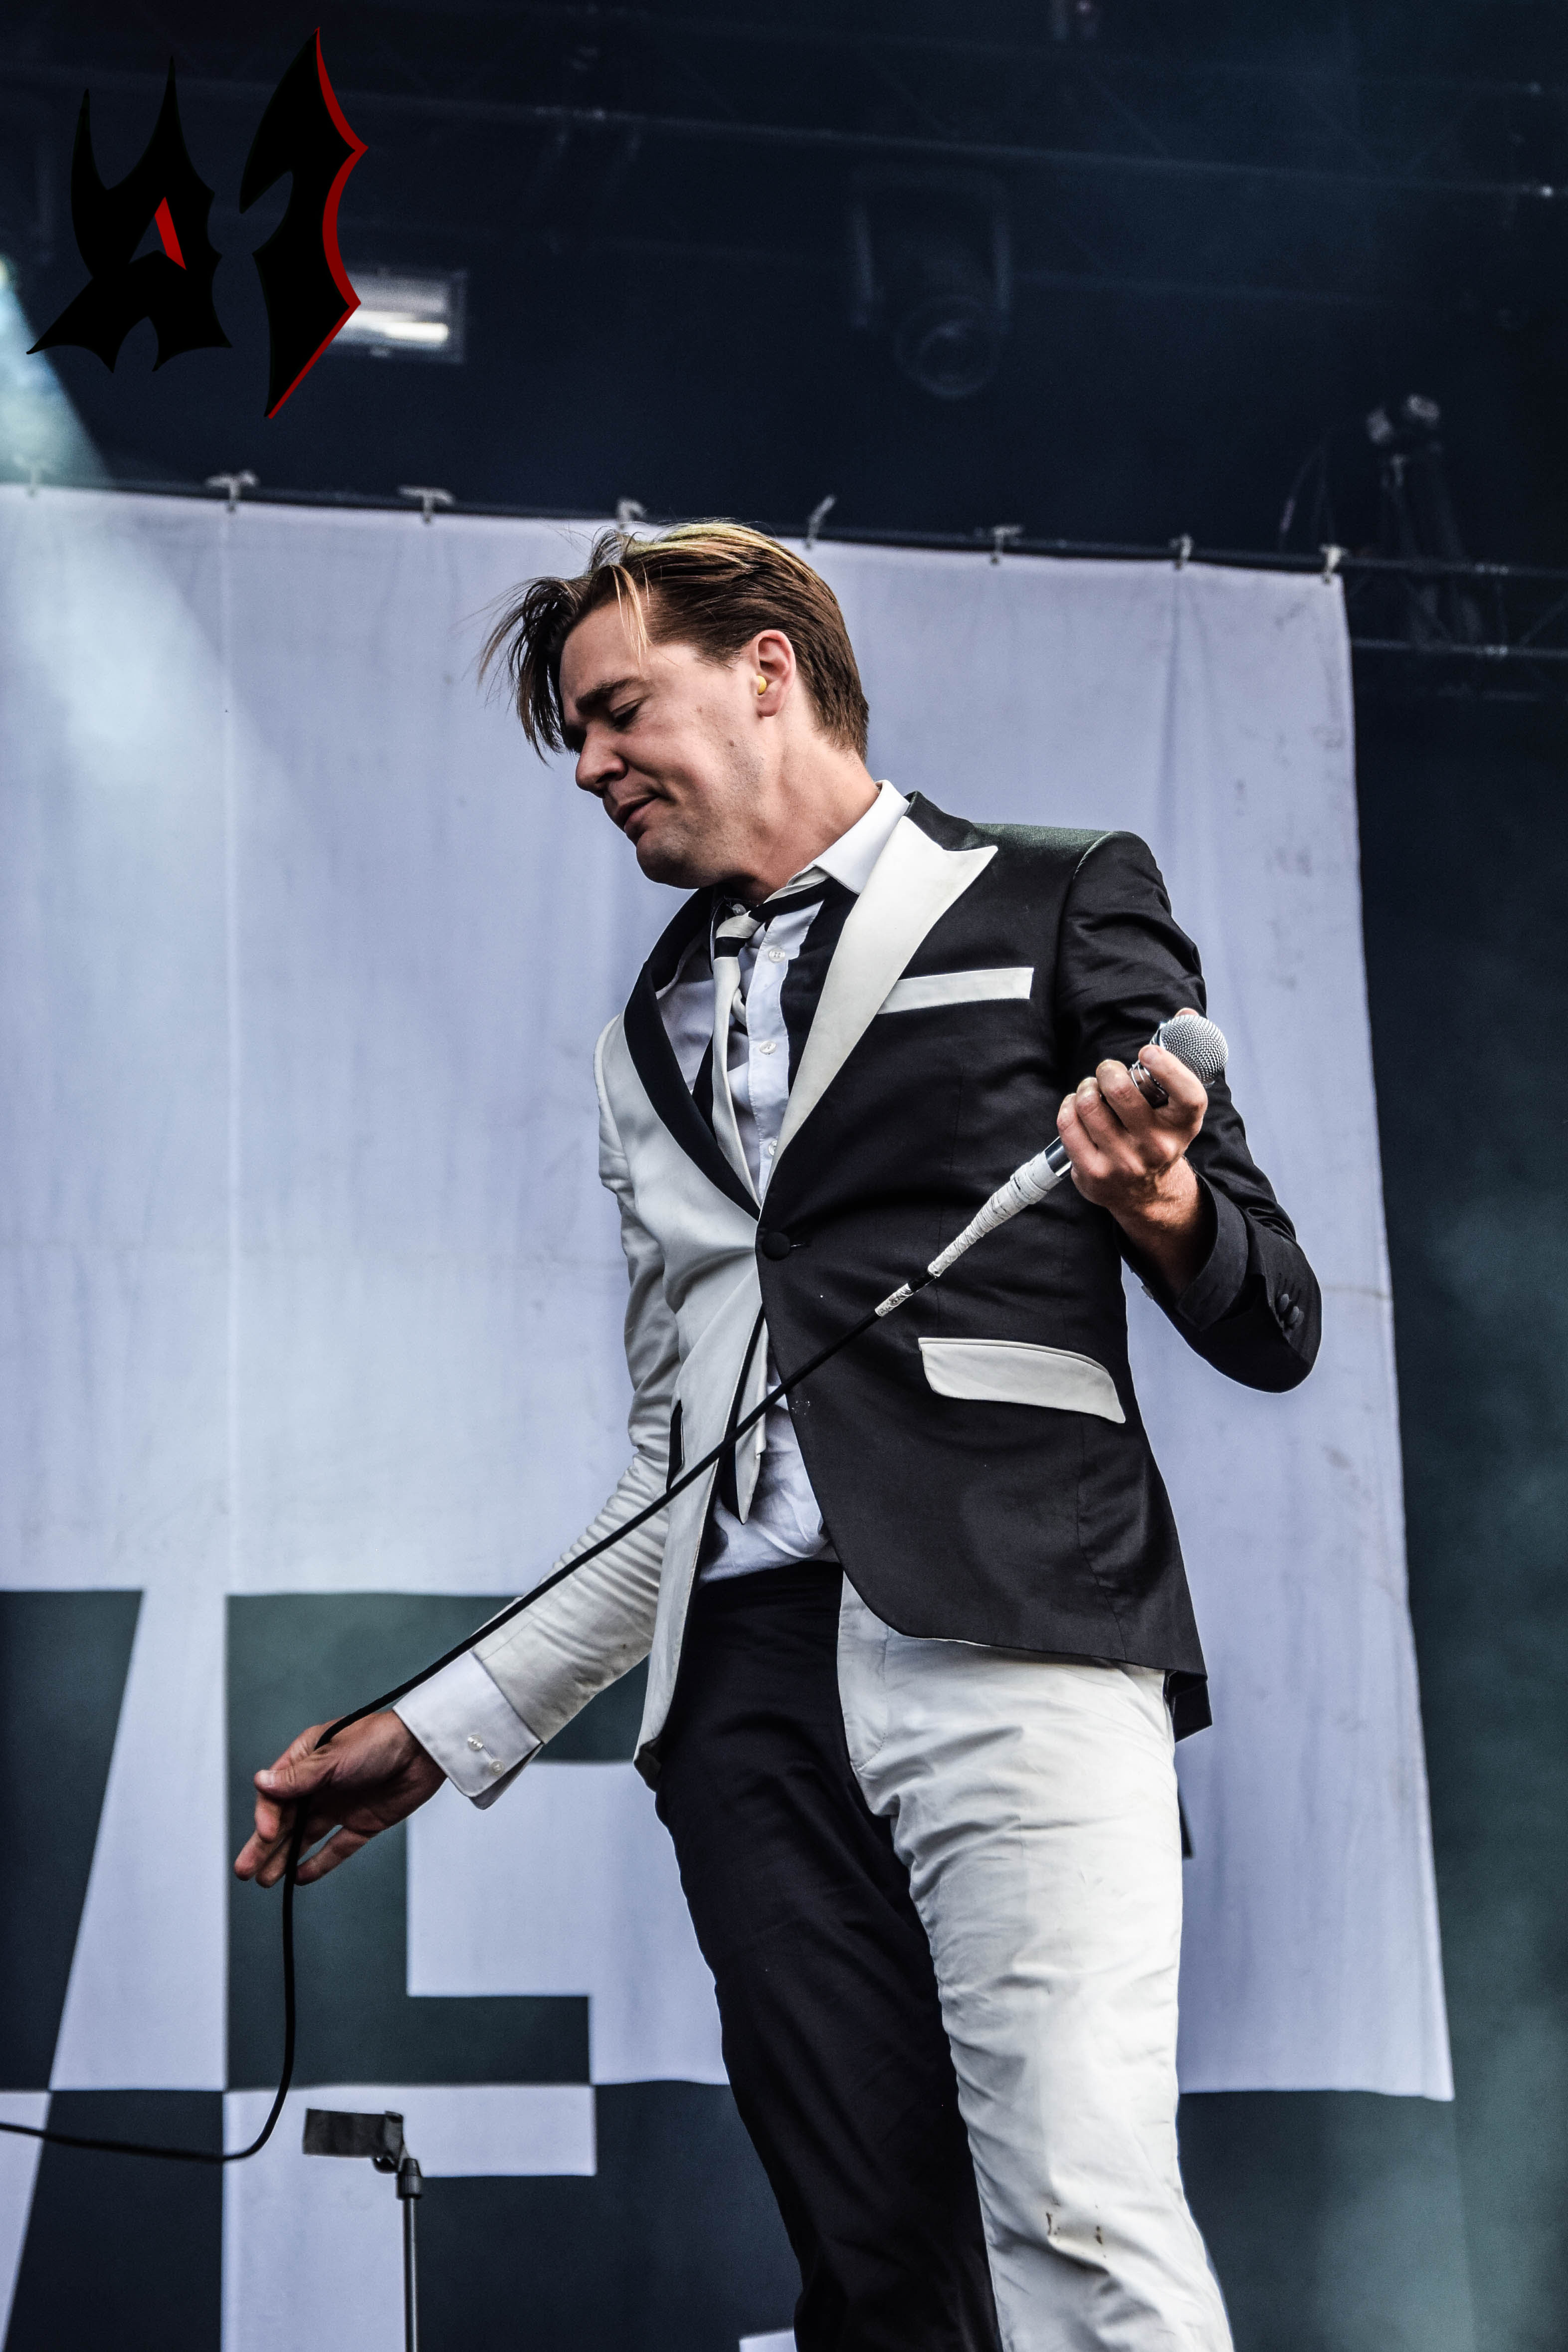 Donwload 2018 – Day 3 - The Hives 23